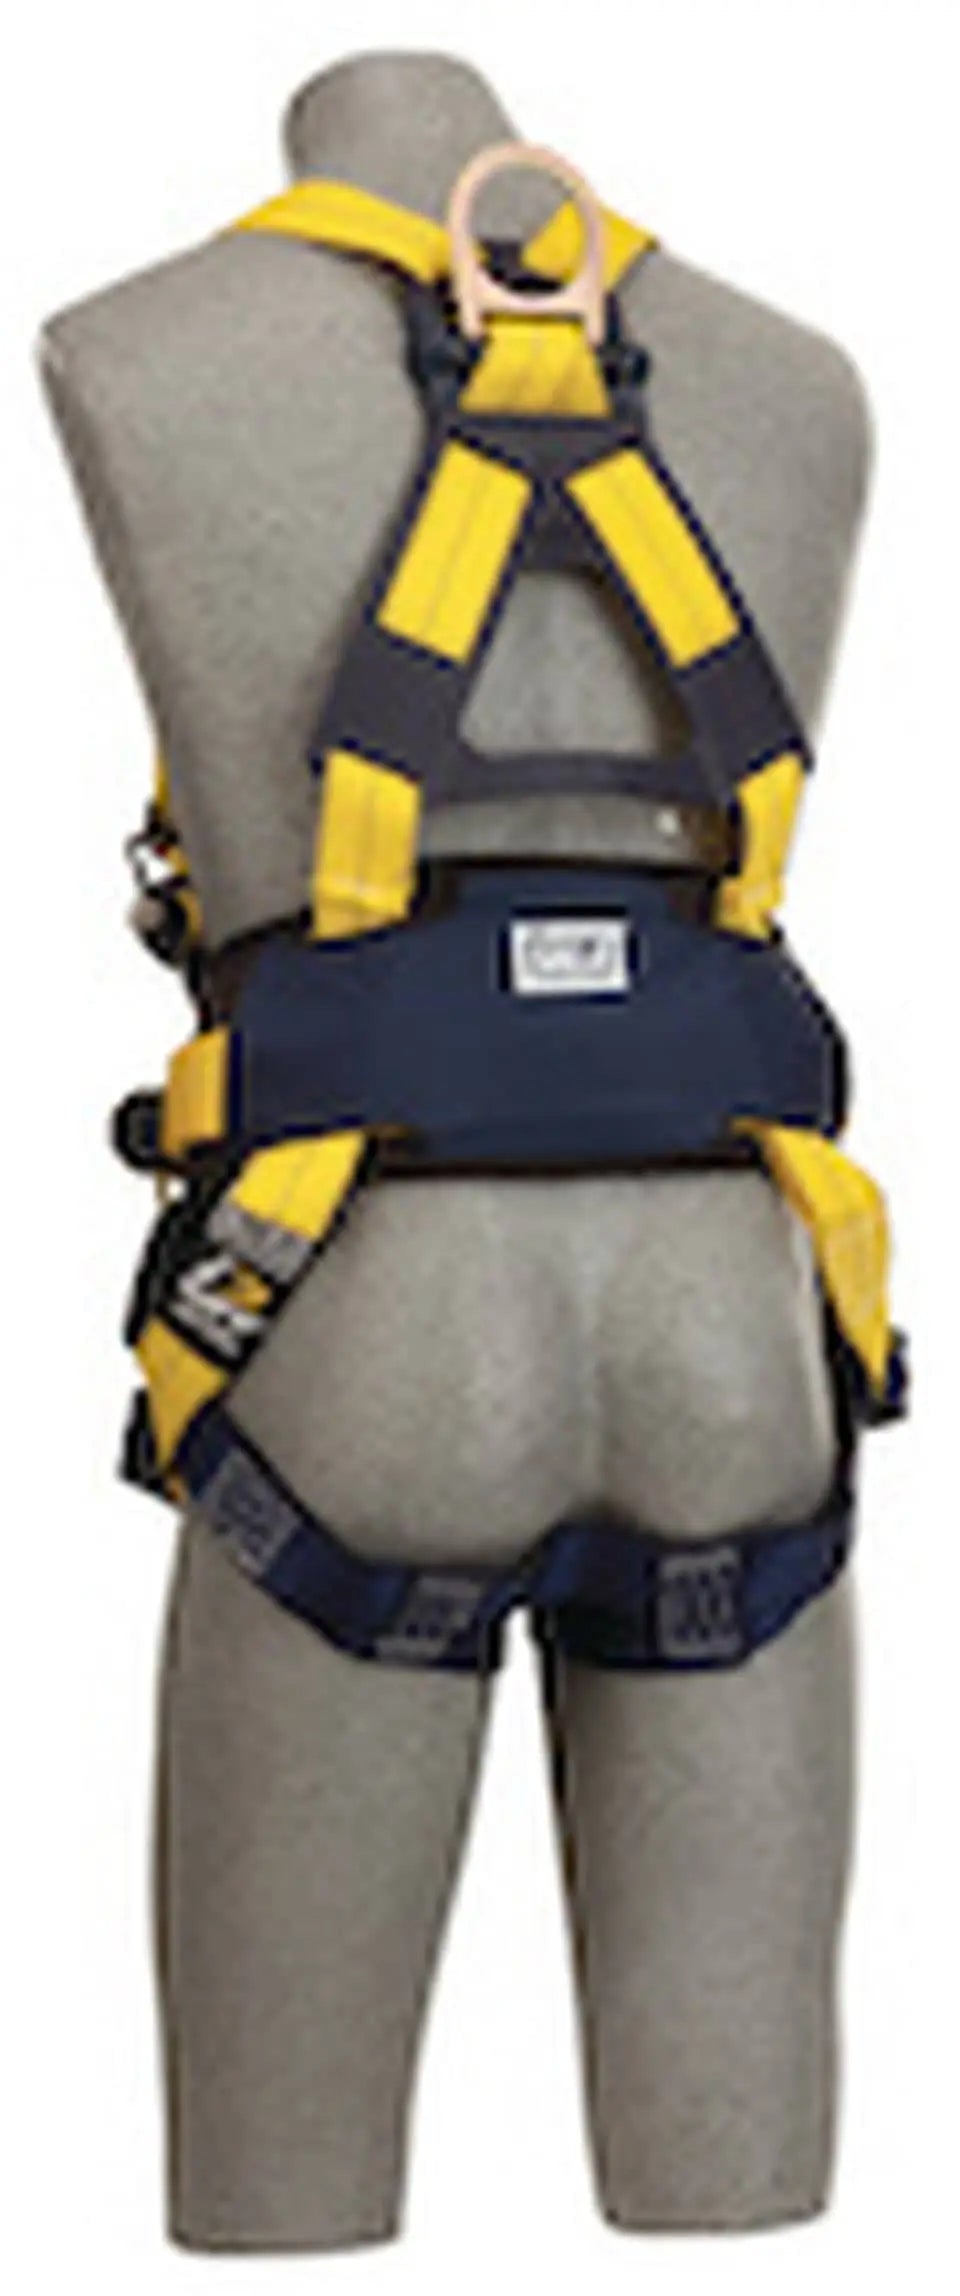 3M‚ DBI-SALA Delta‚ 4 D-Ring Construction Style Positioning/Climbing Harness - Chest Pass-Thru & Tongue Buckle Legs - Becker Safety and Supply